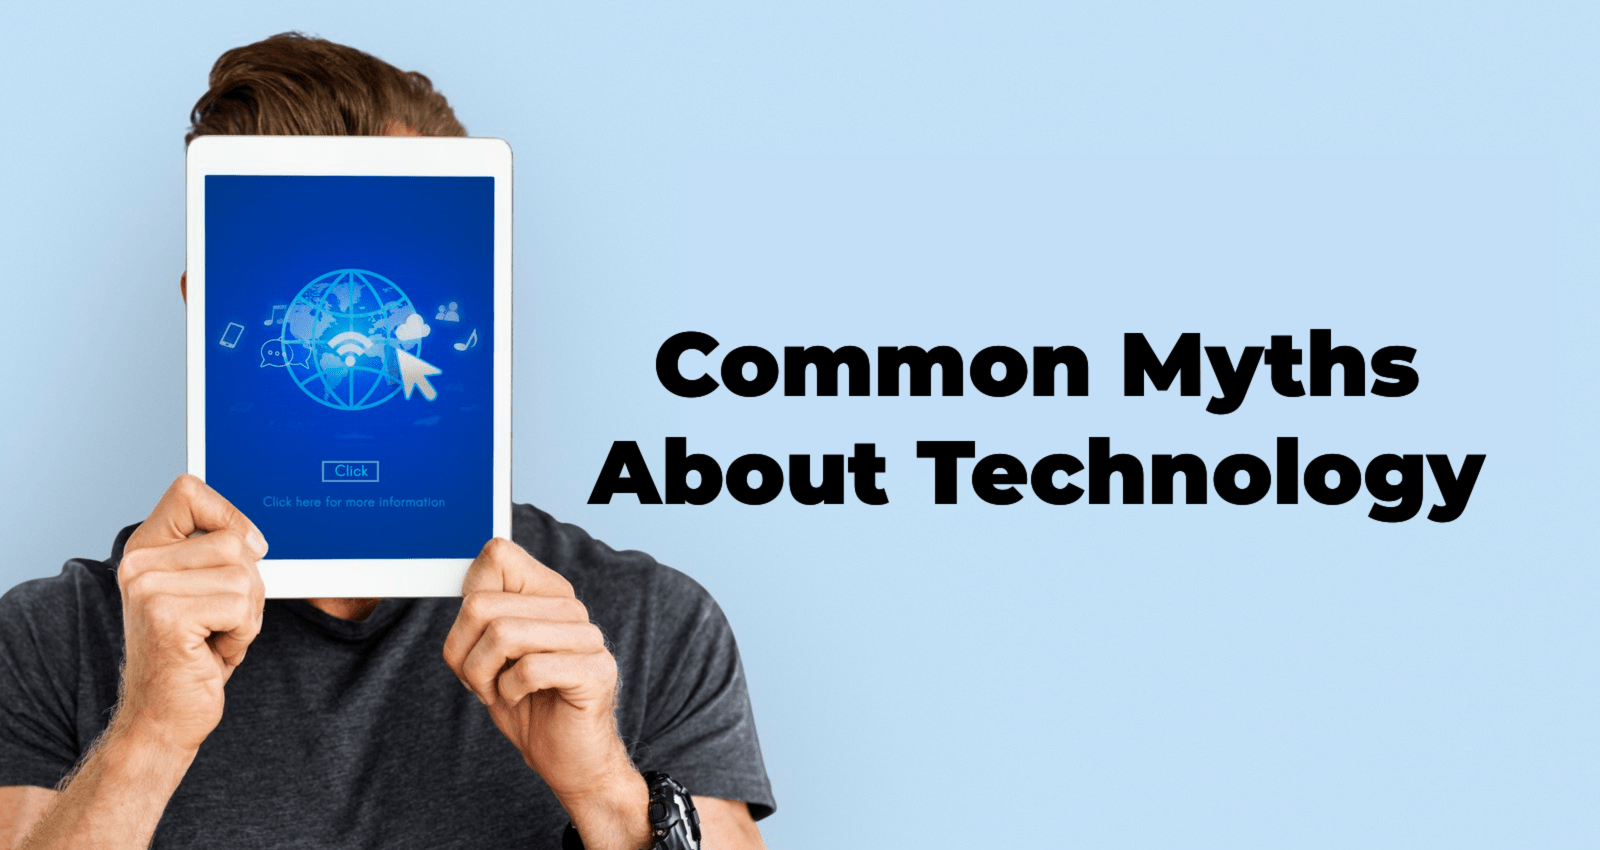 Common Myths, Technology, Common Myths about Technology, Technology Myths